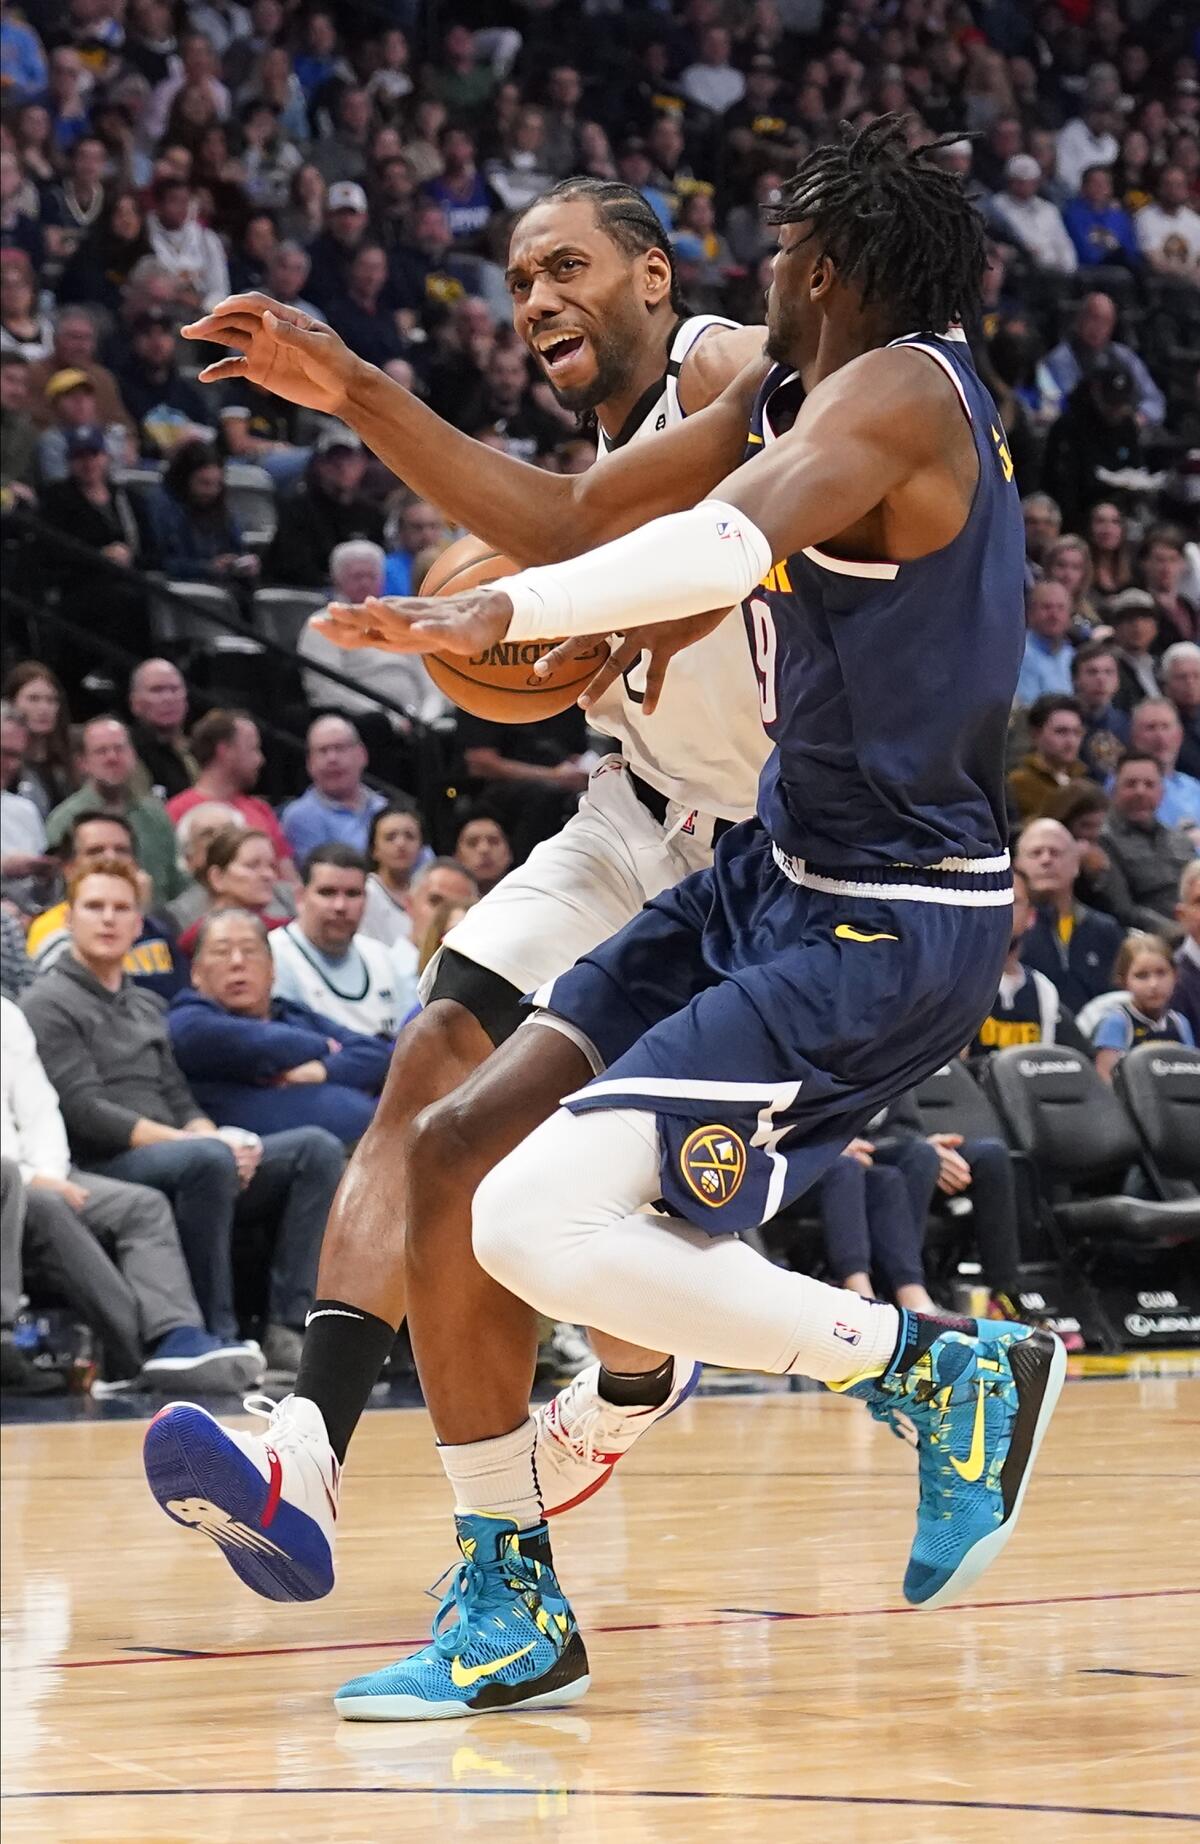 Clippers forward Kawhi Leonard drives to the basket against Nuggets forward Jerami Grant during the first quarter of a game Jan. 12 at the Pepsi Center.